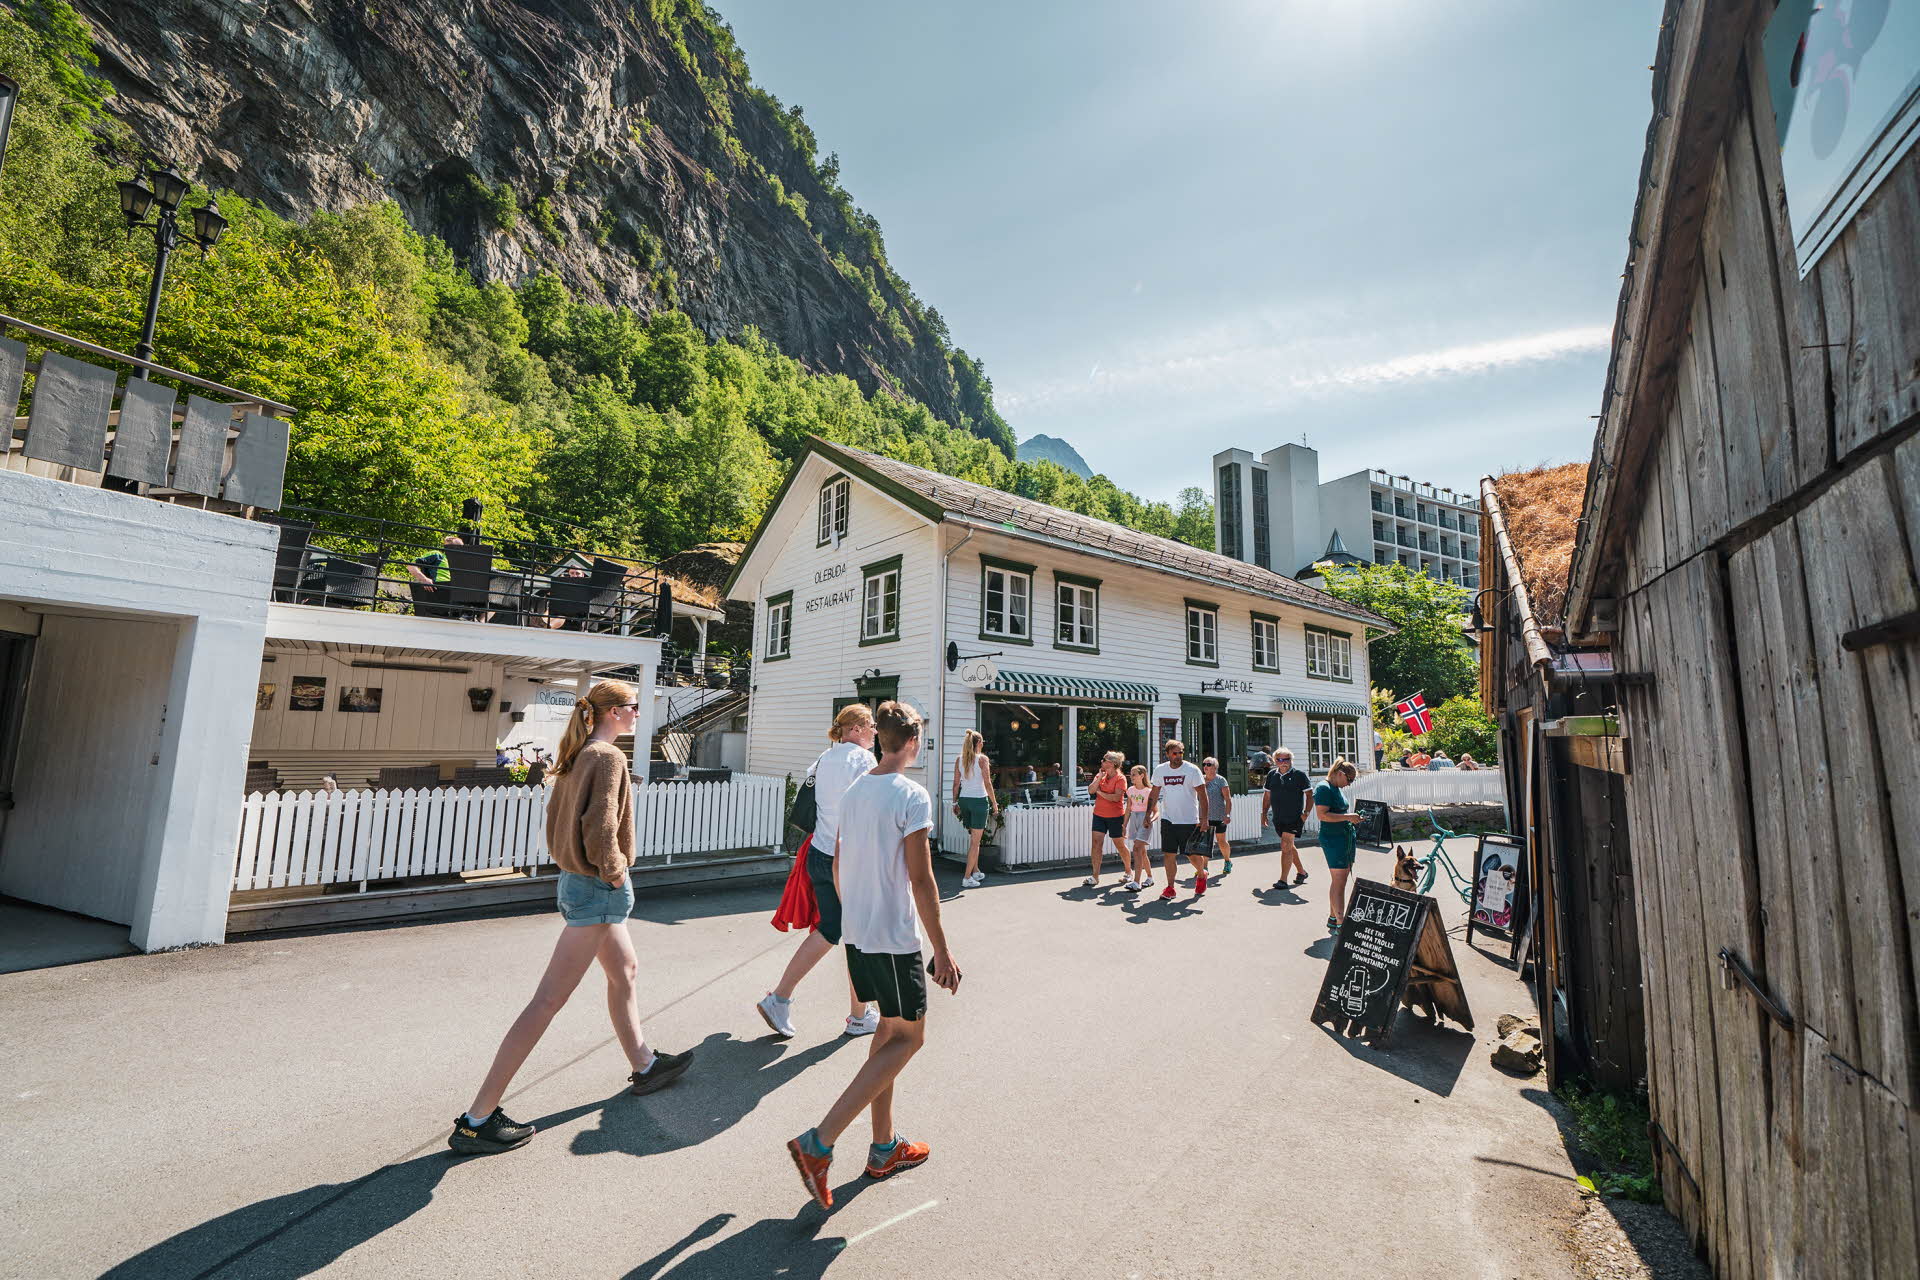 People walking in Geiranger town centre